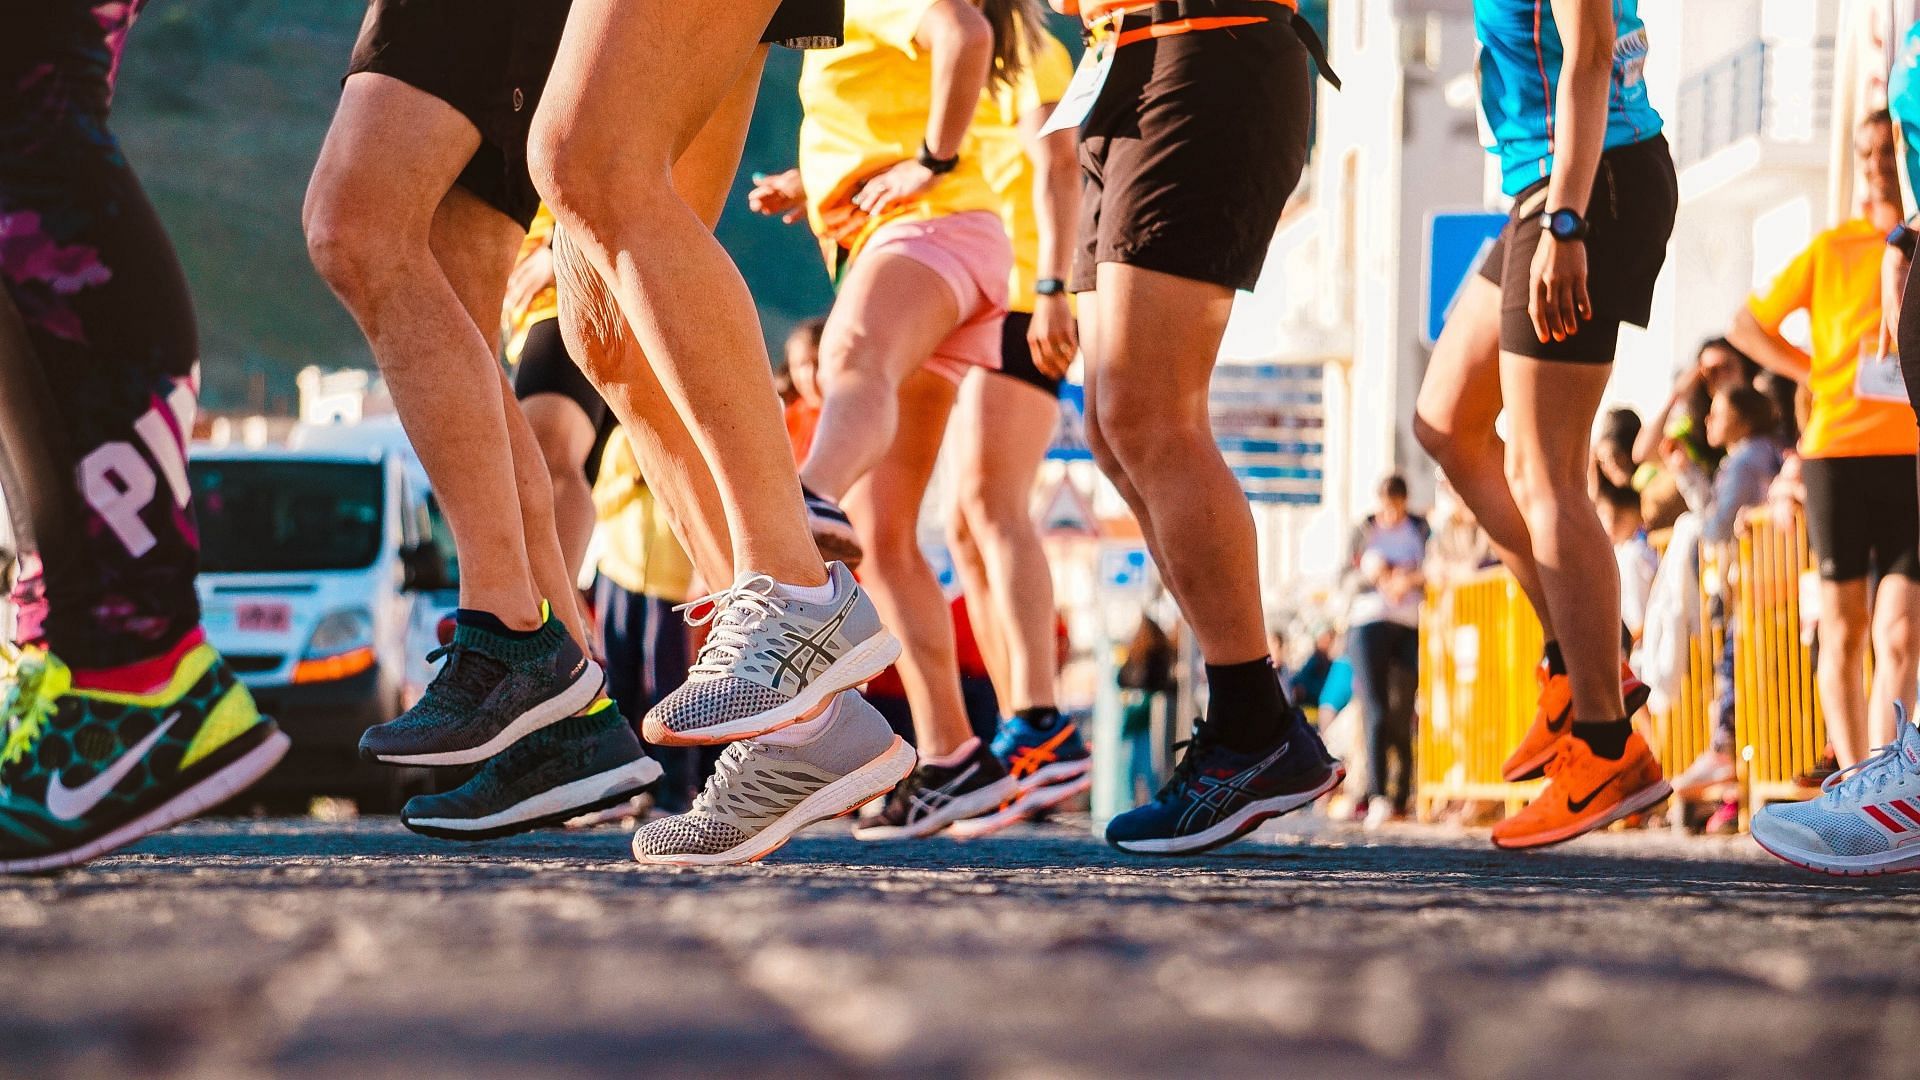 Calf muscles are used in all lower body movements (Image via Pexels/Run Ffwpu)